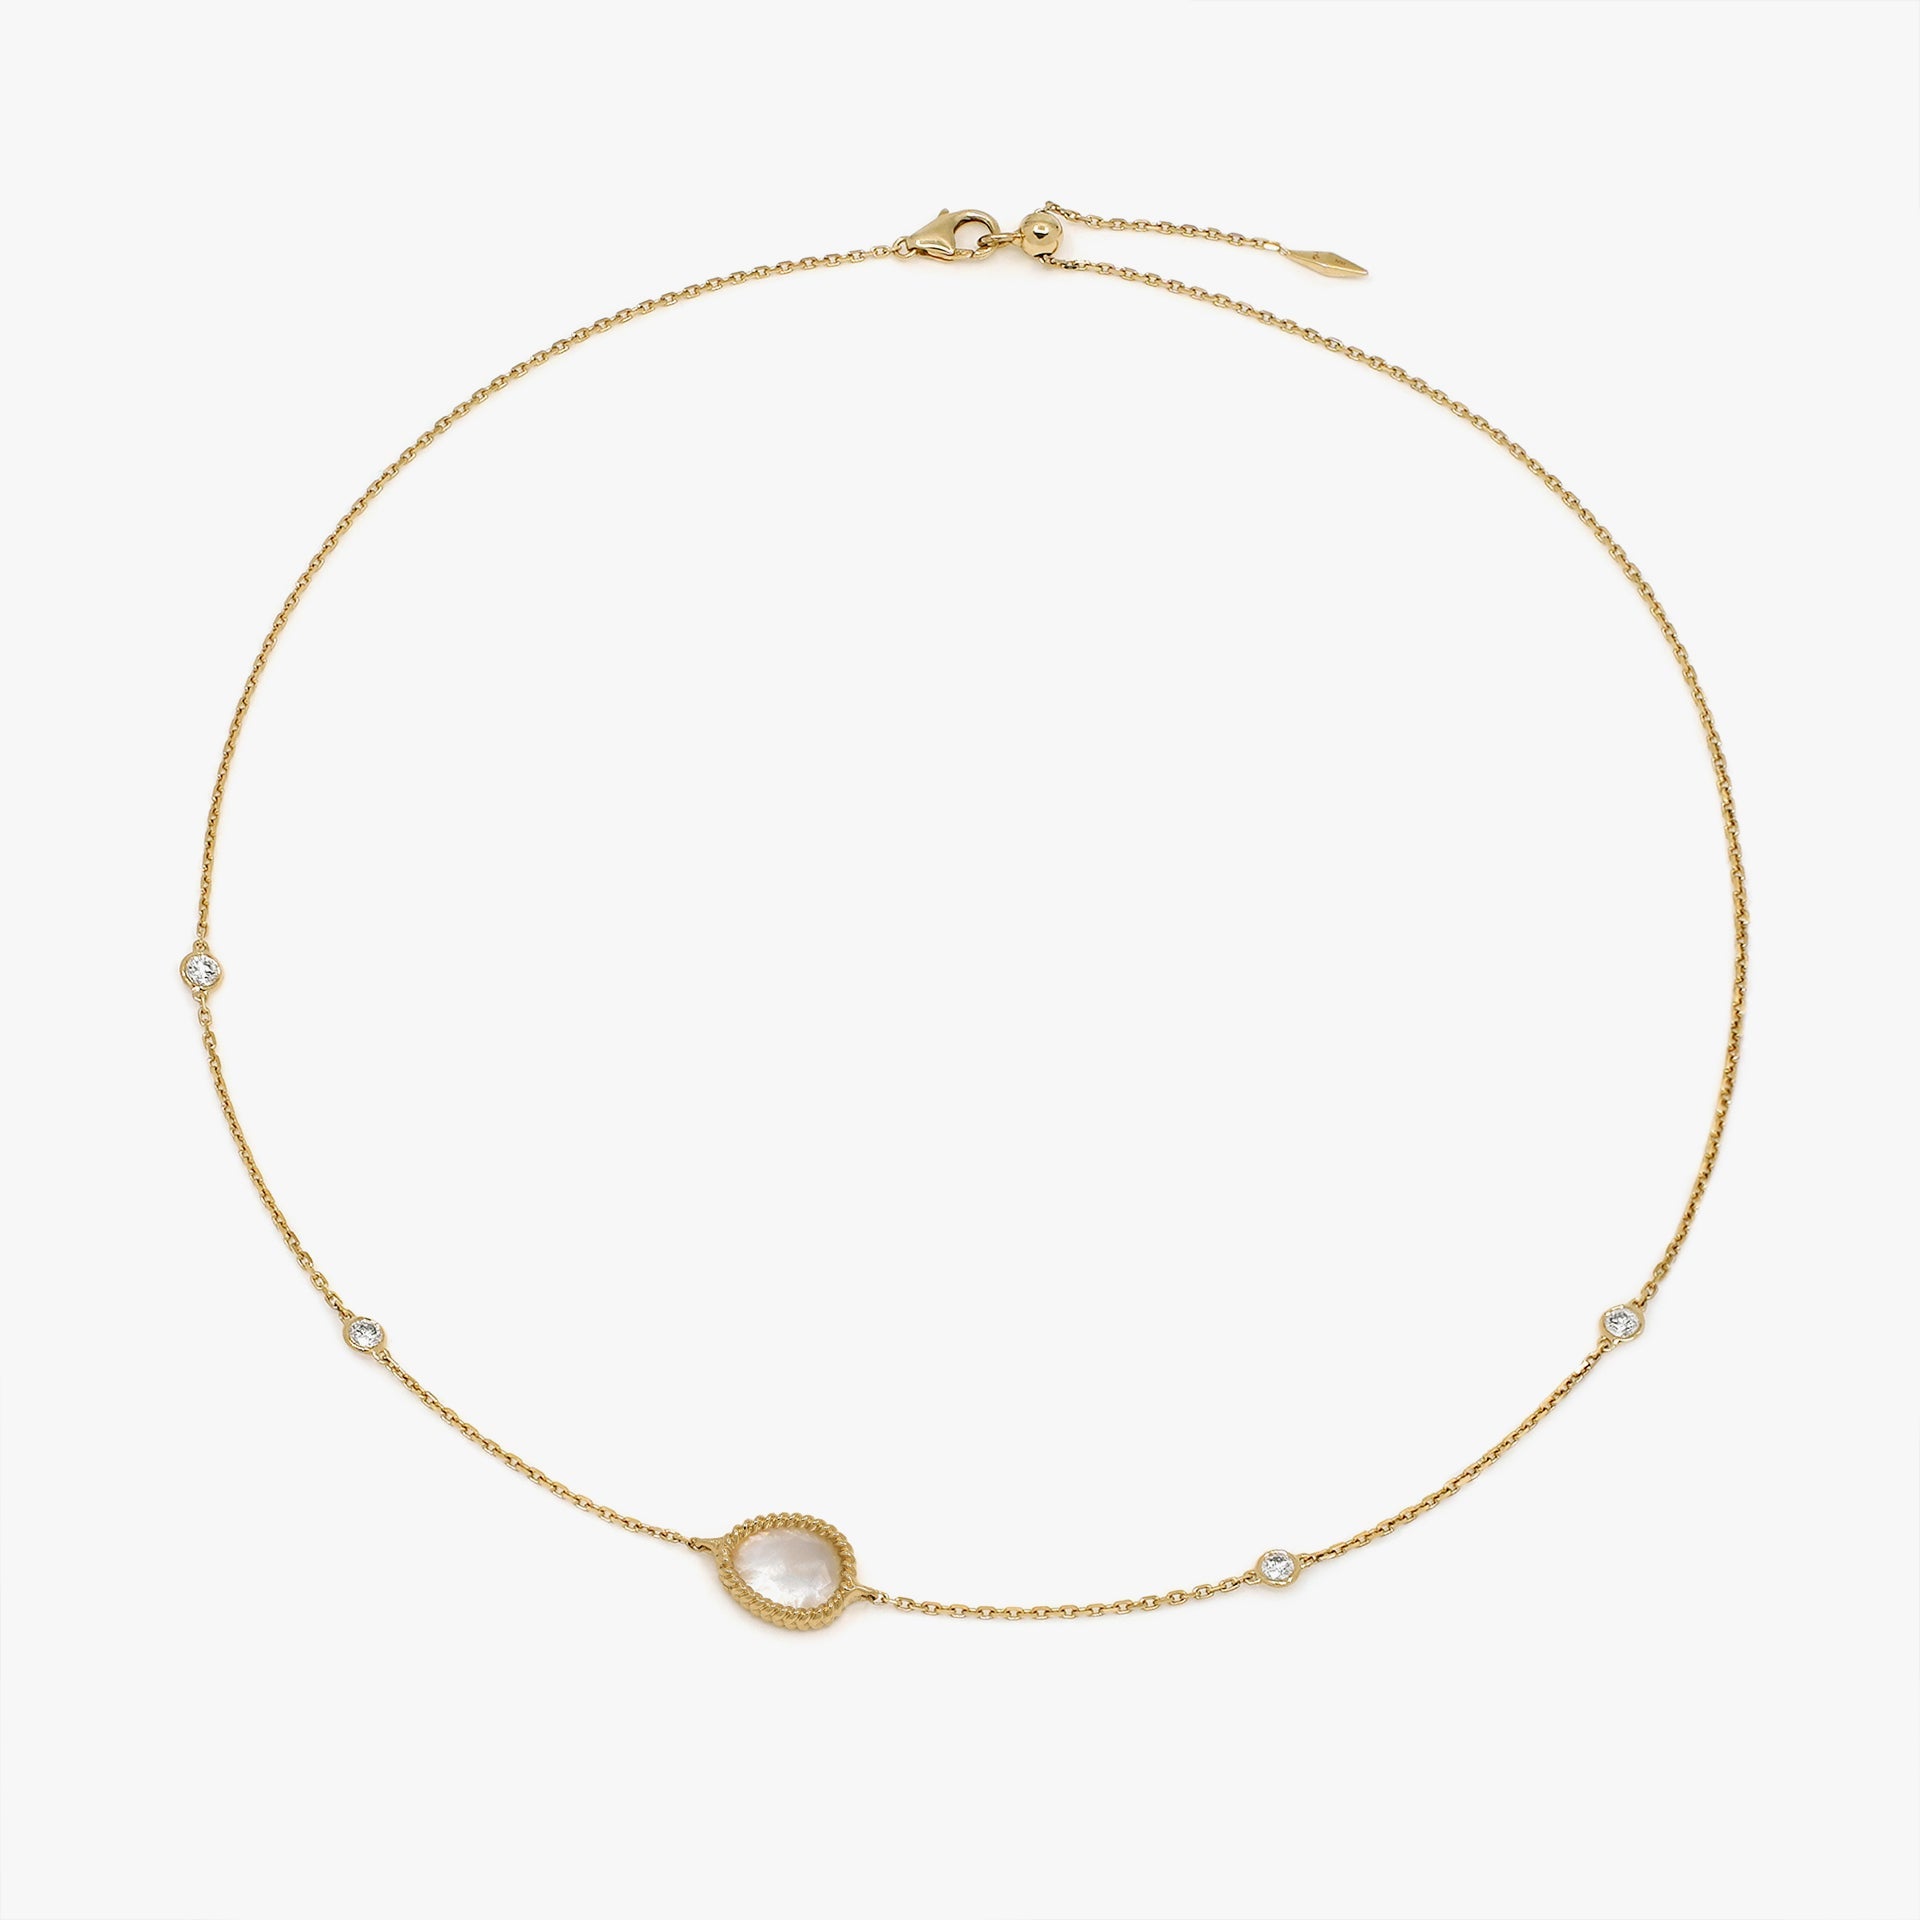 Nina Mariner Choker In 18 Karat Yellow Gold With Natural White Diamonds And Mother Of Pearl Stone